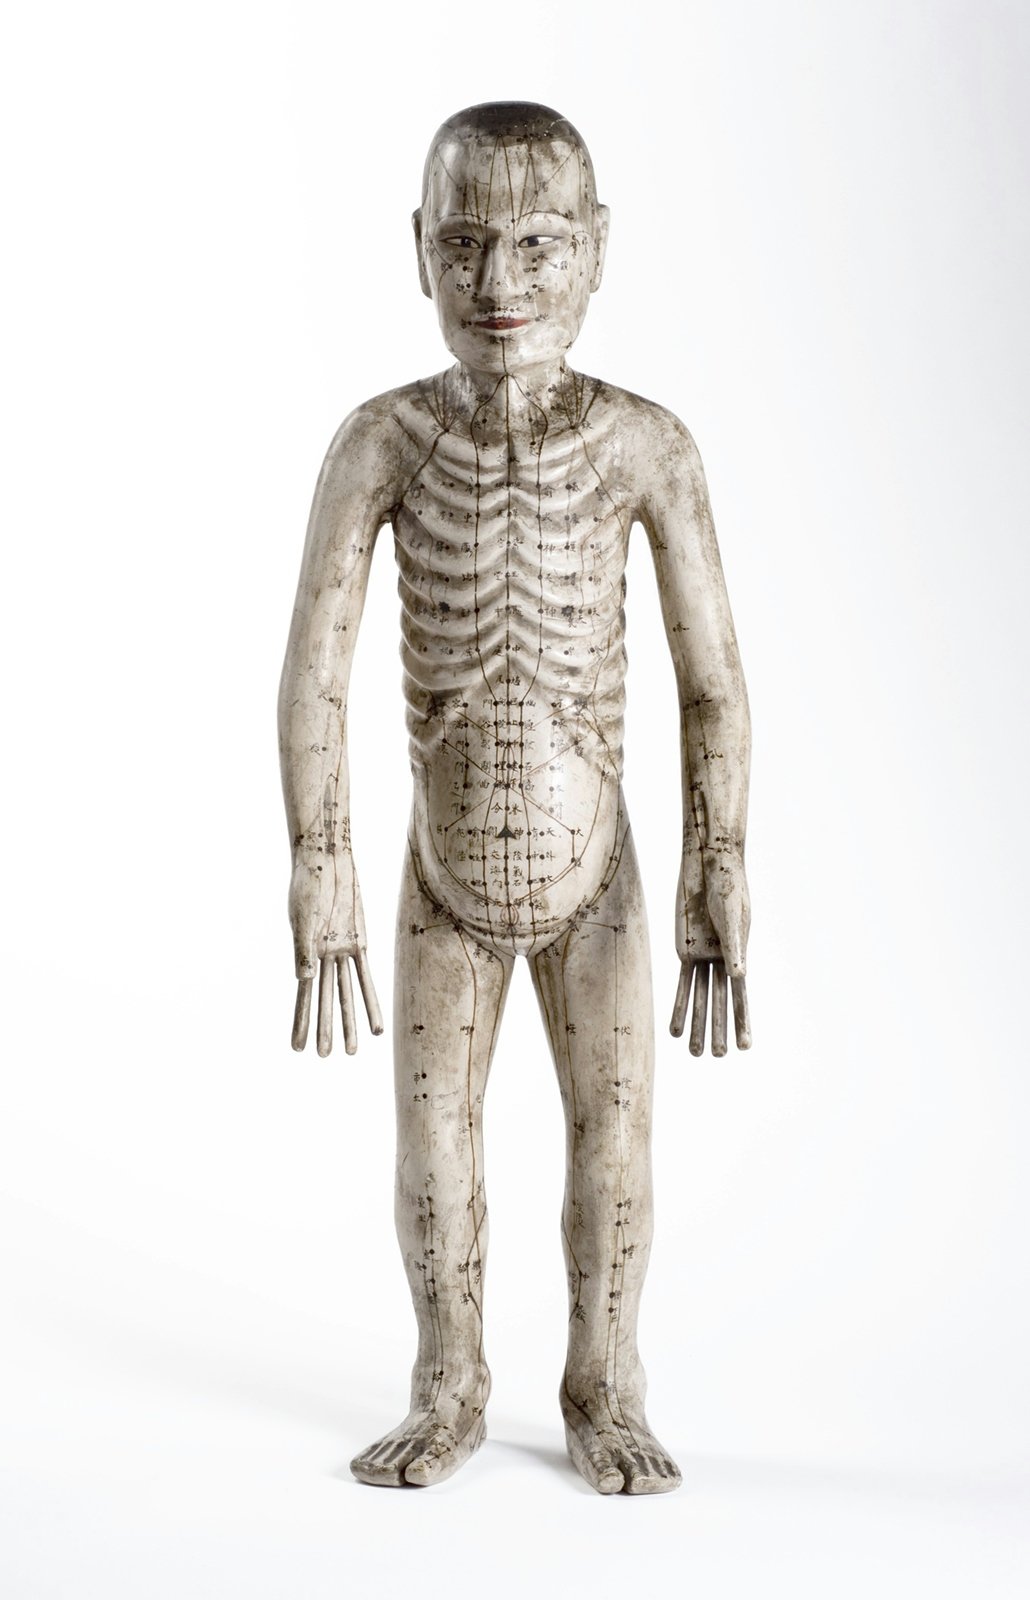 An image of a human figure made from papier mache with acupuncture points marked on it.